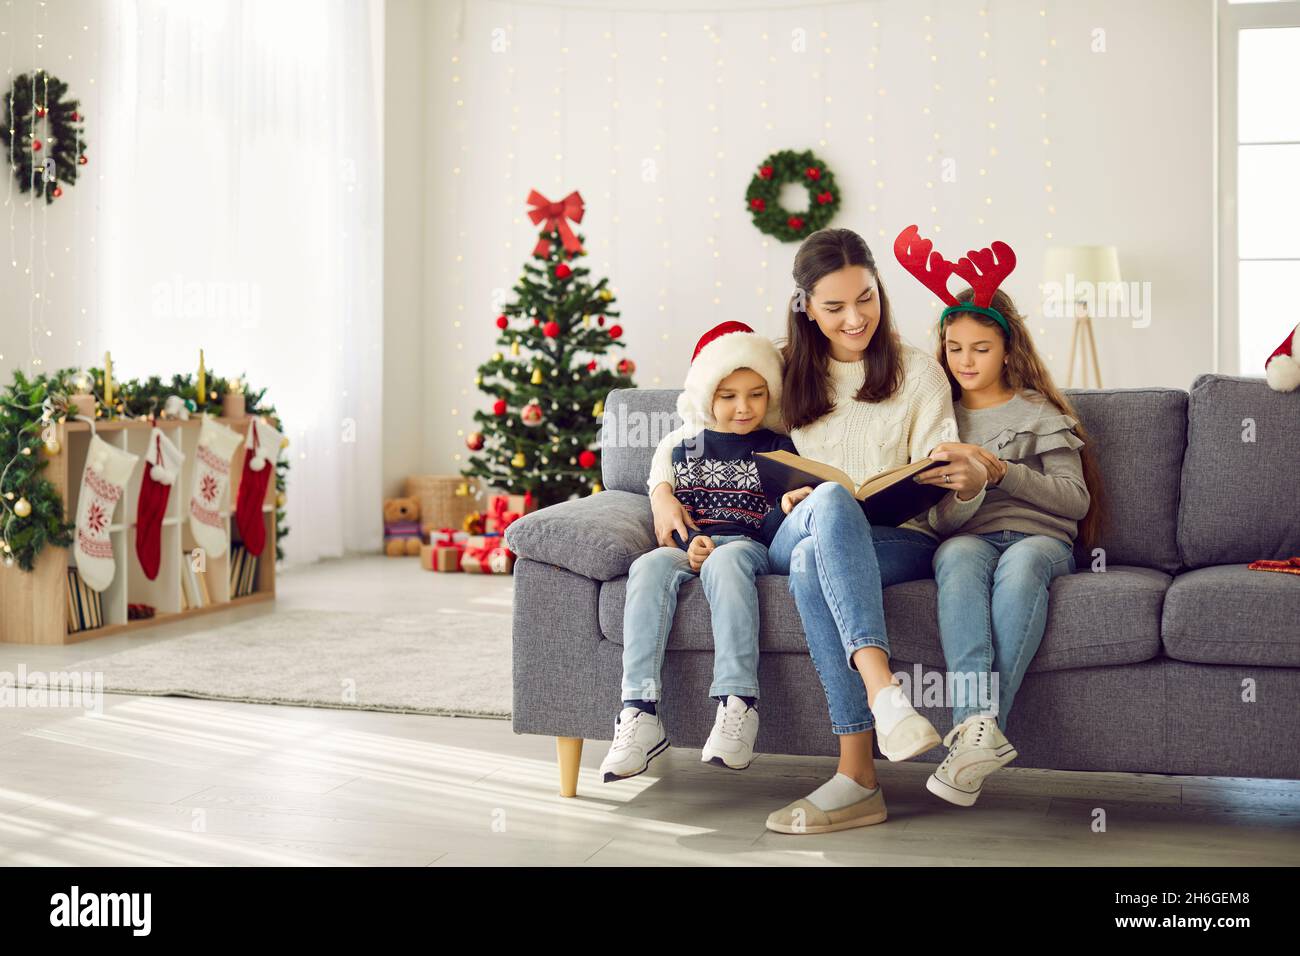 Happy mom and kids reading book sitting on sofa in living room decorated for Christmas Stock Photo